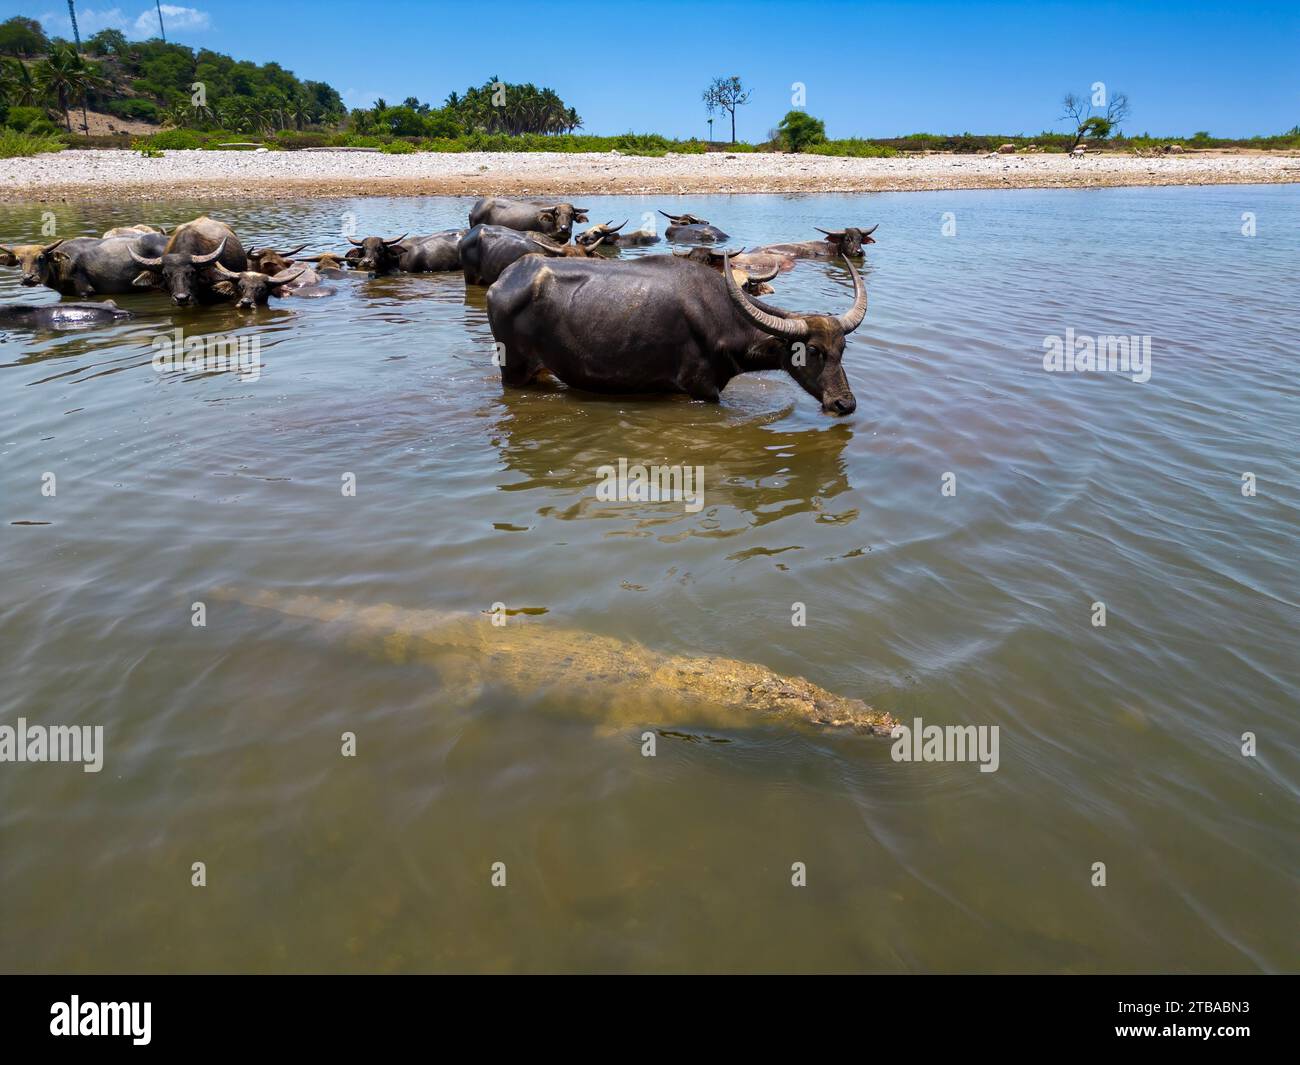 These Domestic Asian water buffalo, Bubalus arnee, are keeping a close eye on this salt water crocodile, Crocodylus porosus, they share the river with Stock Photo